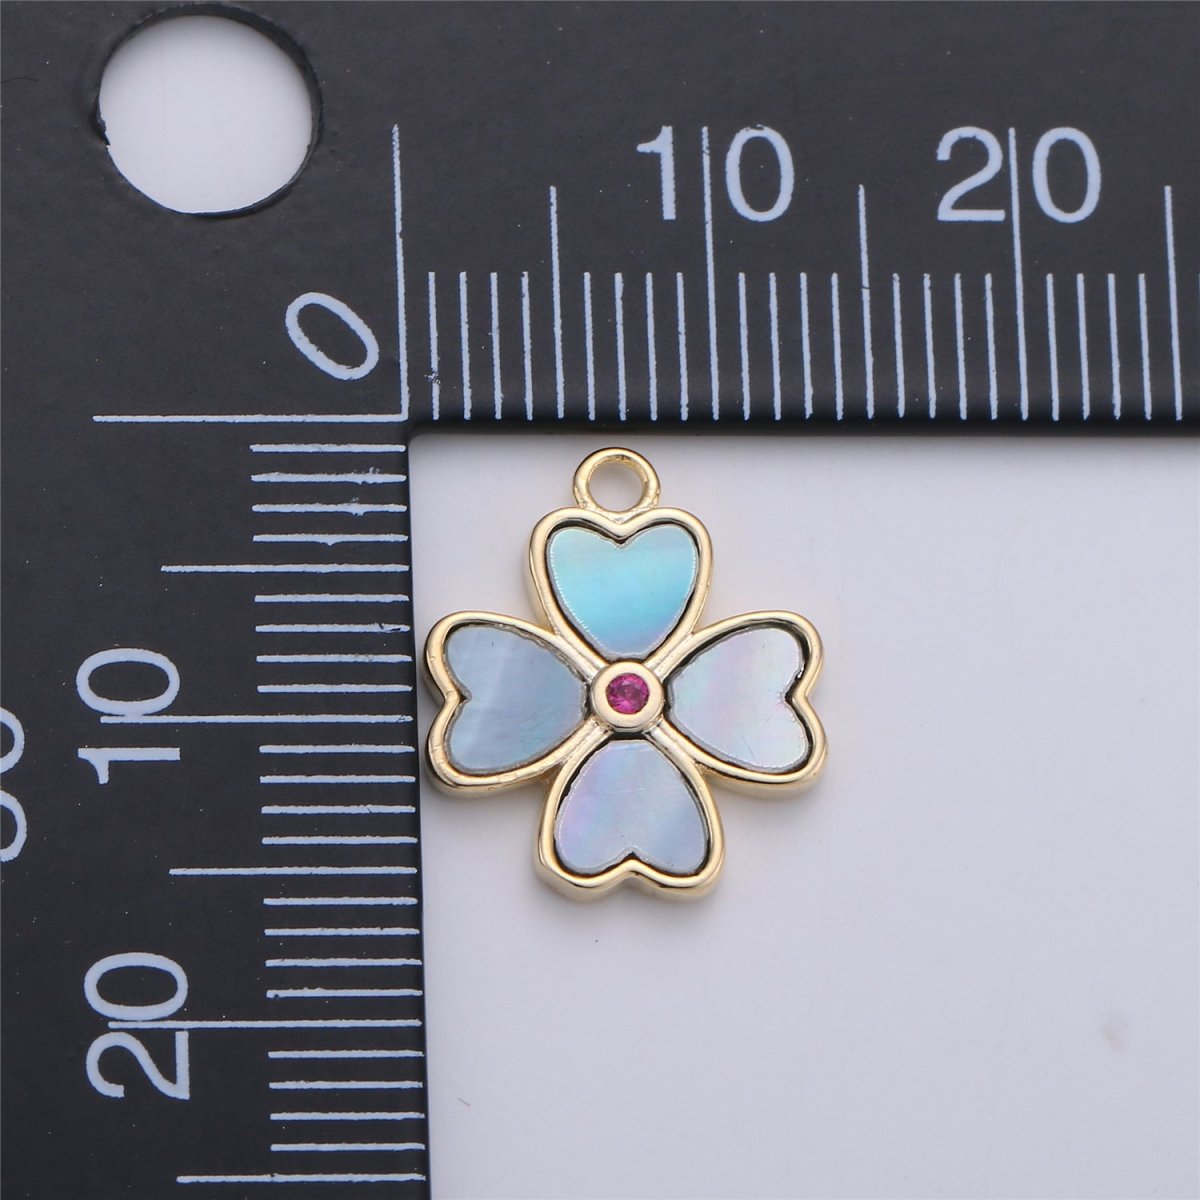 CLEARANCE SALE | Dainty Gold Filled Iridescent Multi Heart Charm, CZ Mirco Pave Enamel Love Pendant Necklace Bracelet Earring Charm Jewelry Making Supply | C-715 - DLUXCA